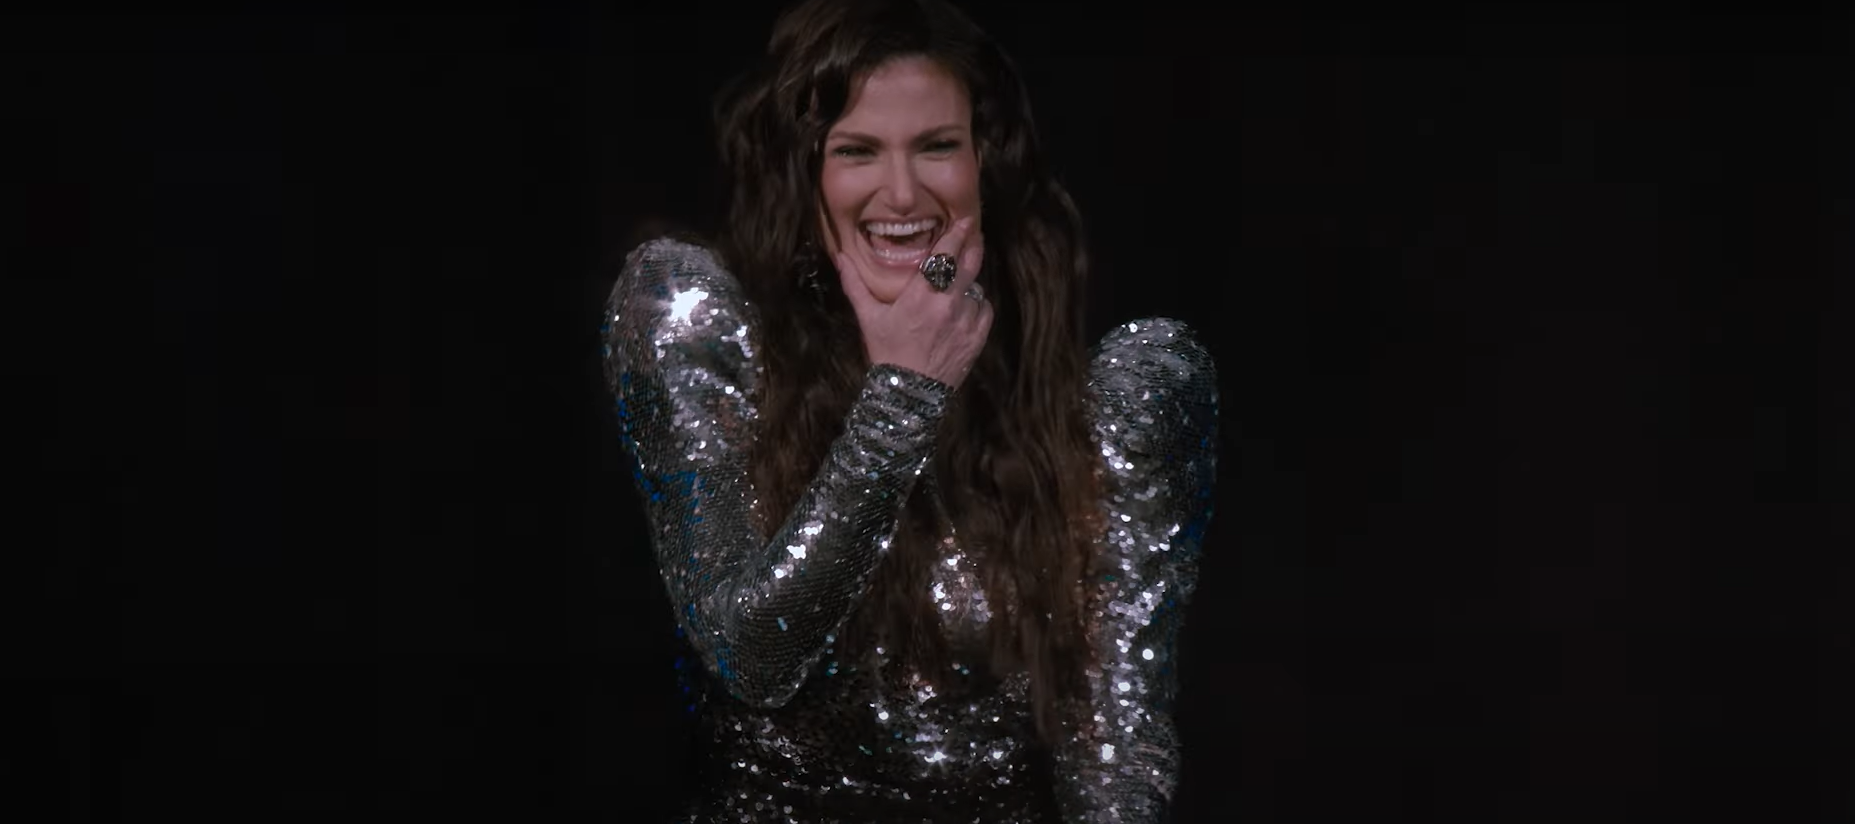 Trailer Watch: Idina Menzel Reflects on Career Highs and Lows in “Which Way to the Stage?”